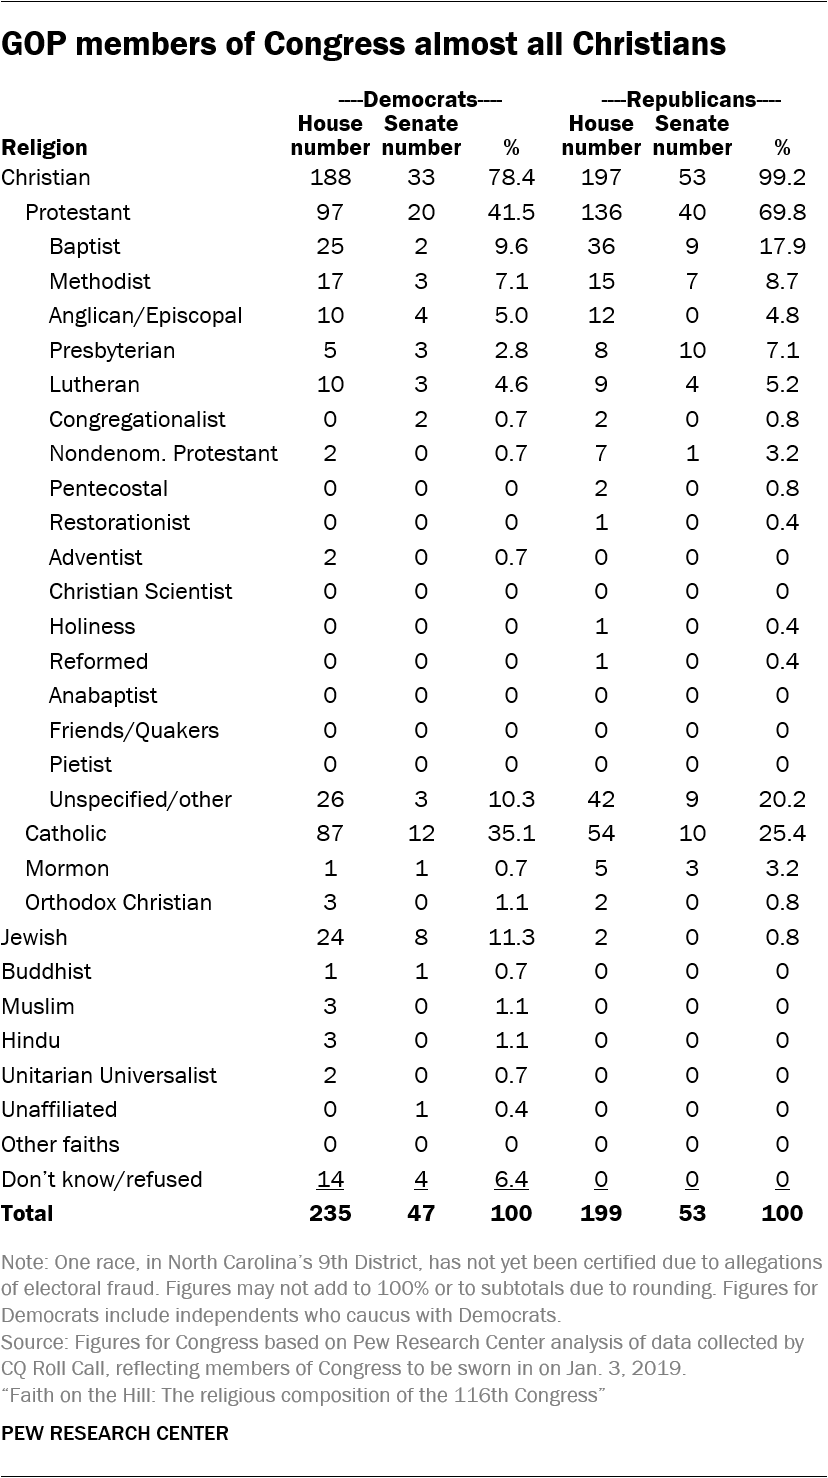 Jehovah Witness Vs Christianity Comparison Chart